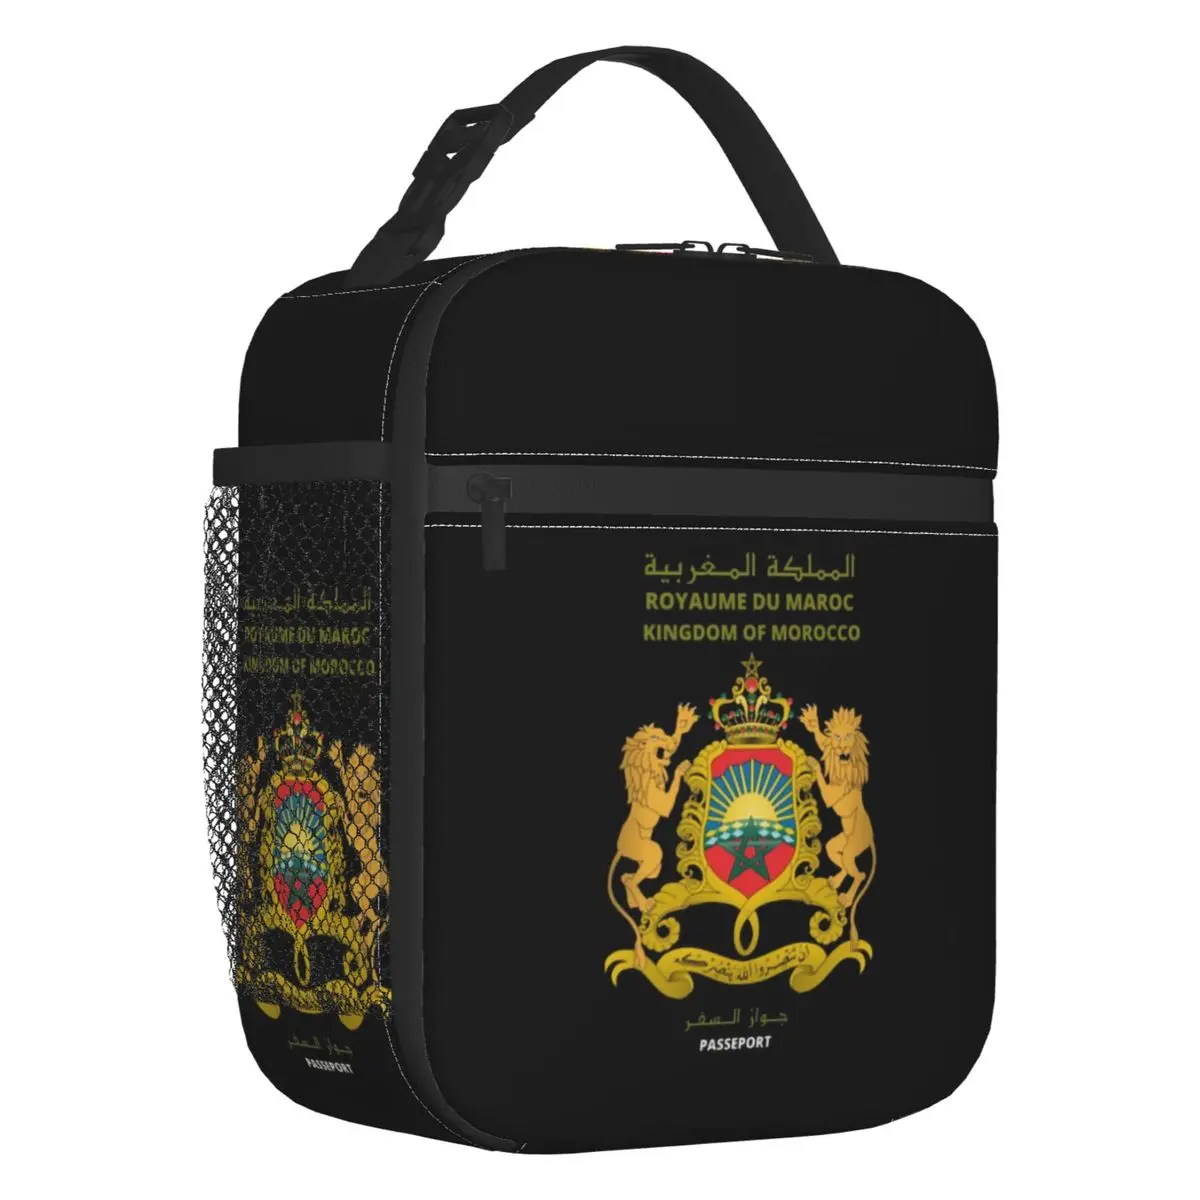 Moroccan Passport Kingdom Of Morocco Insulated Lunch Bag for Women Resuable Thermal Cooler Bento Box Office Work School